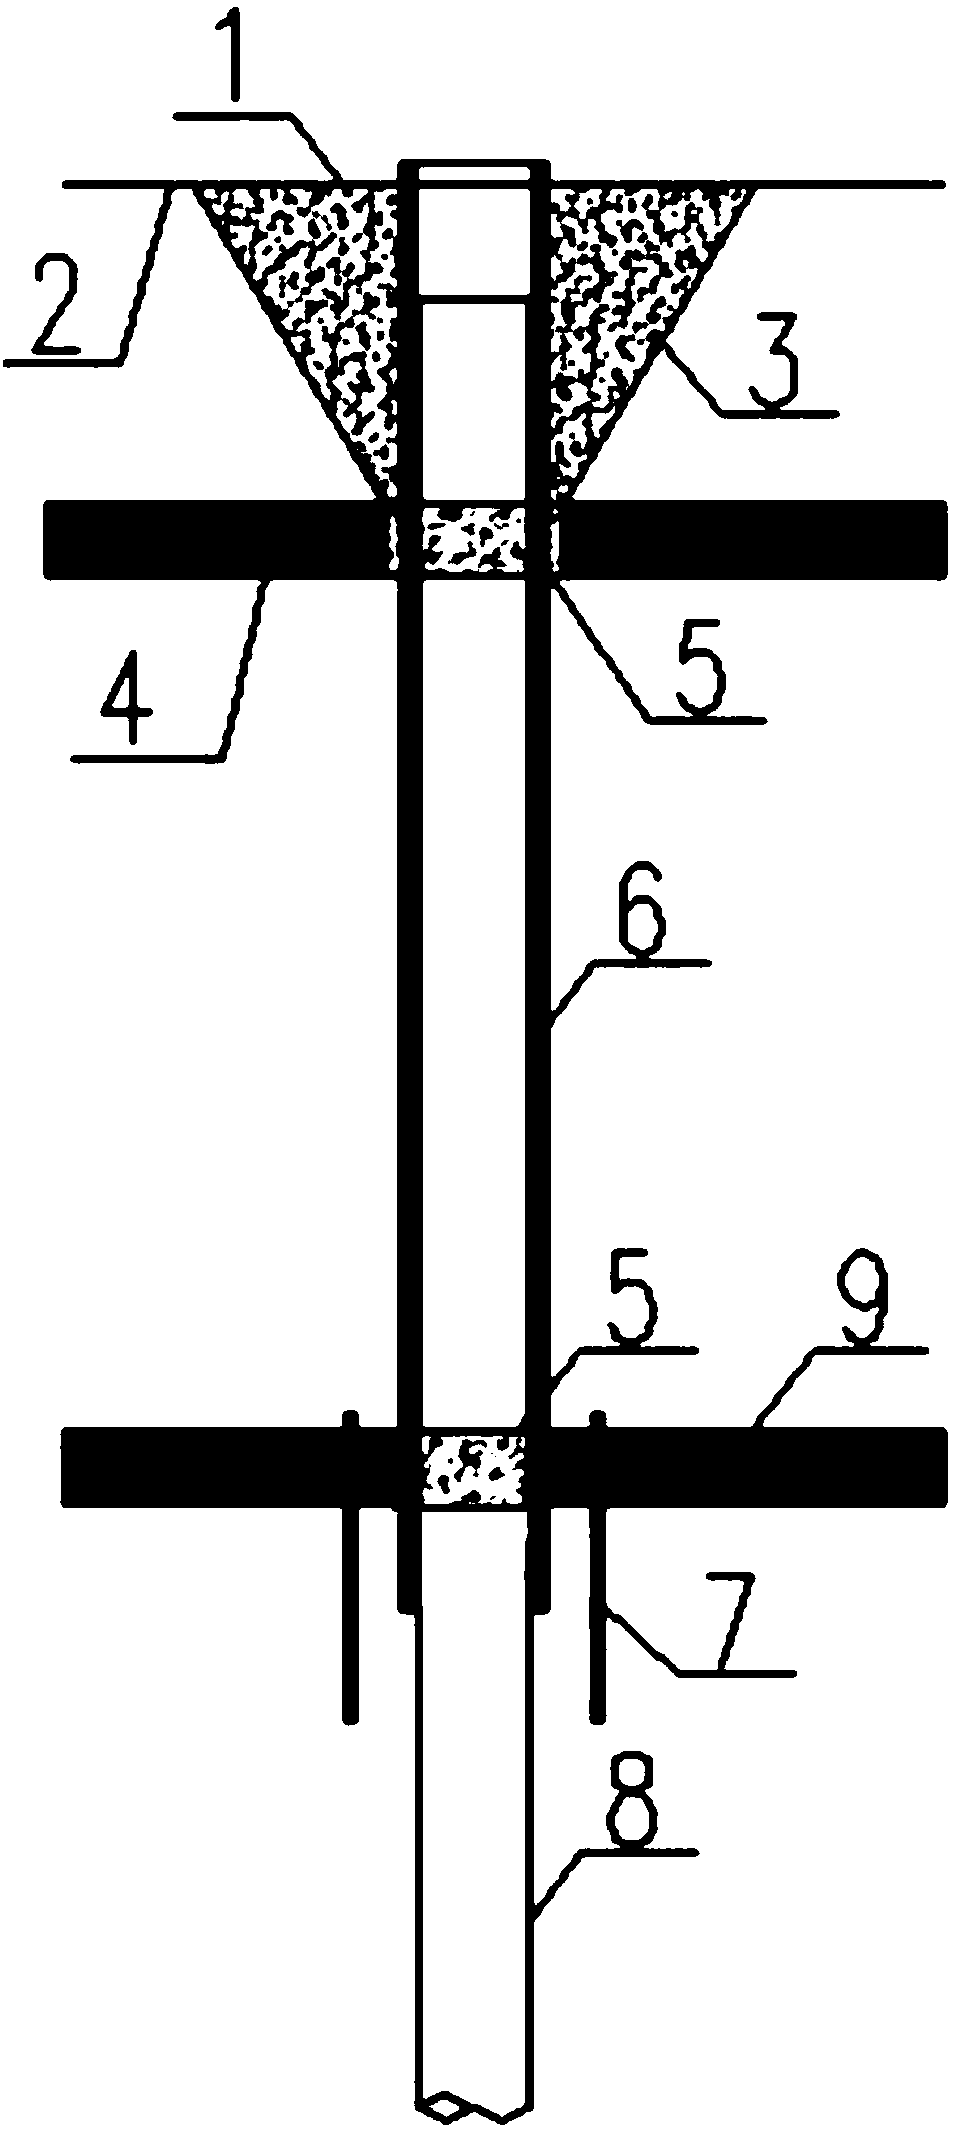 Cast-in-place pile construction method for underground engineering structure